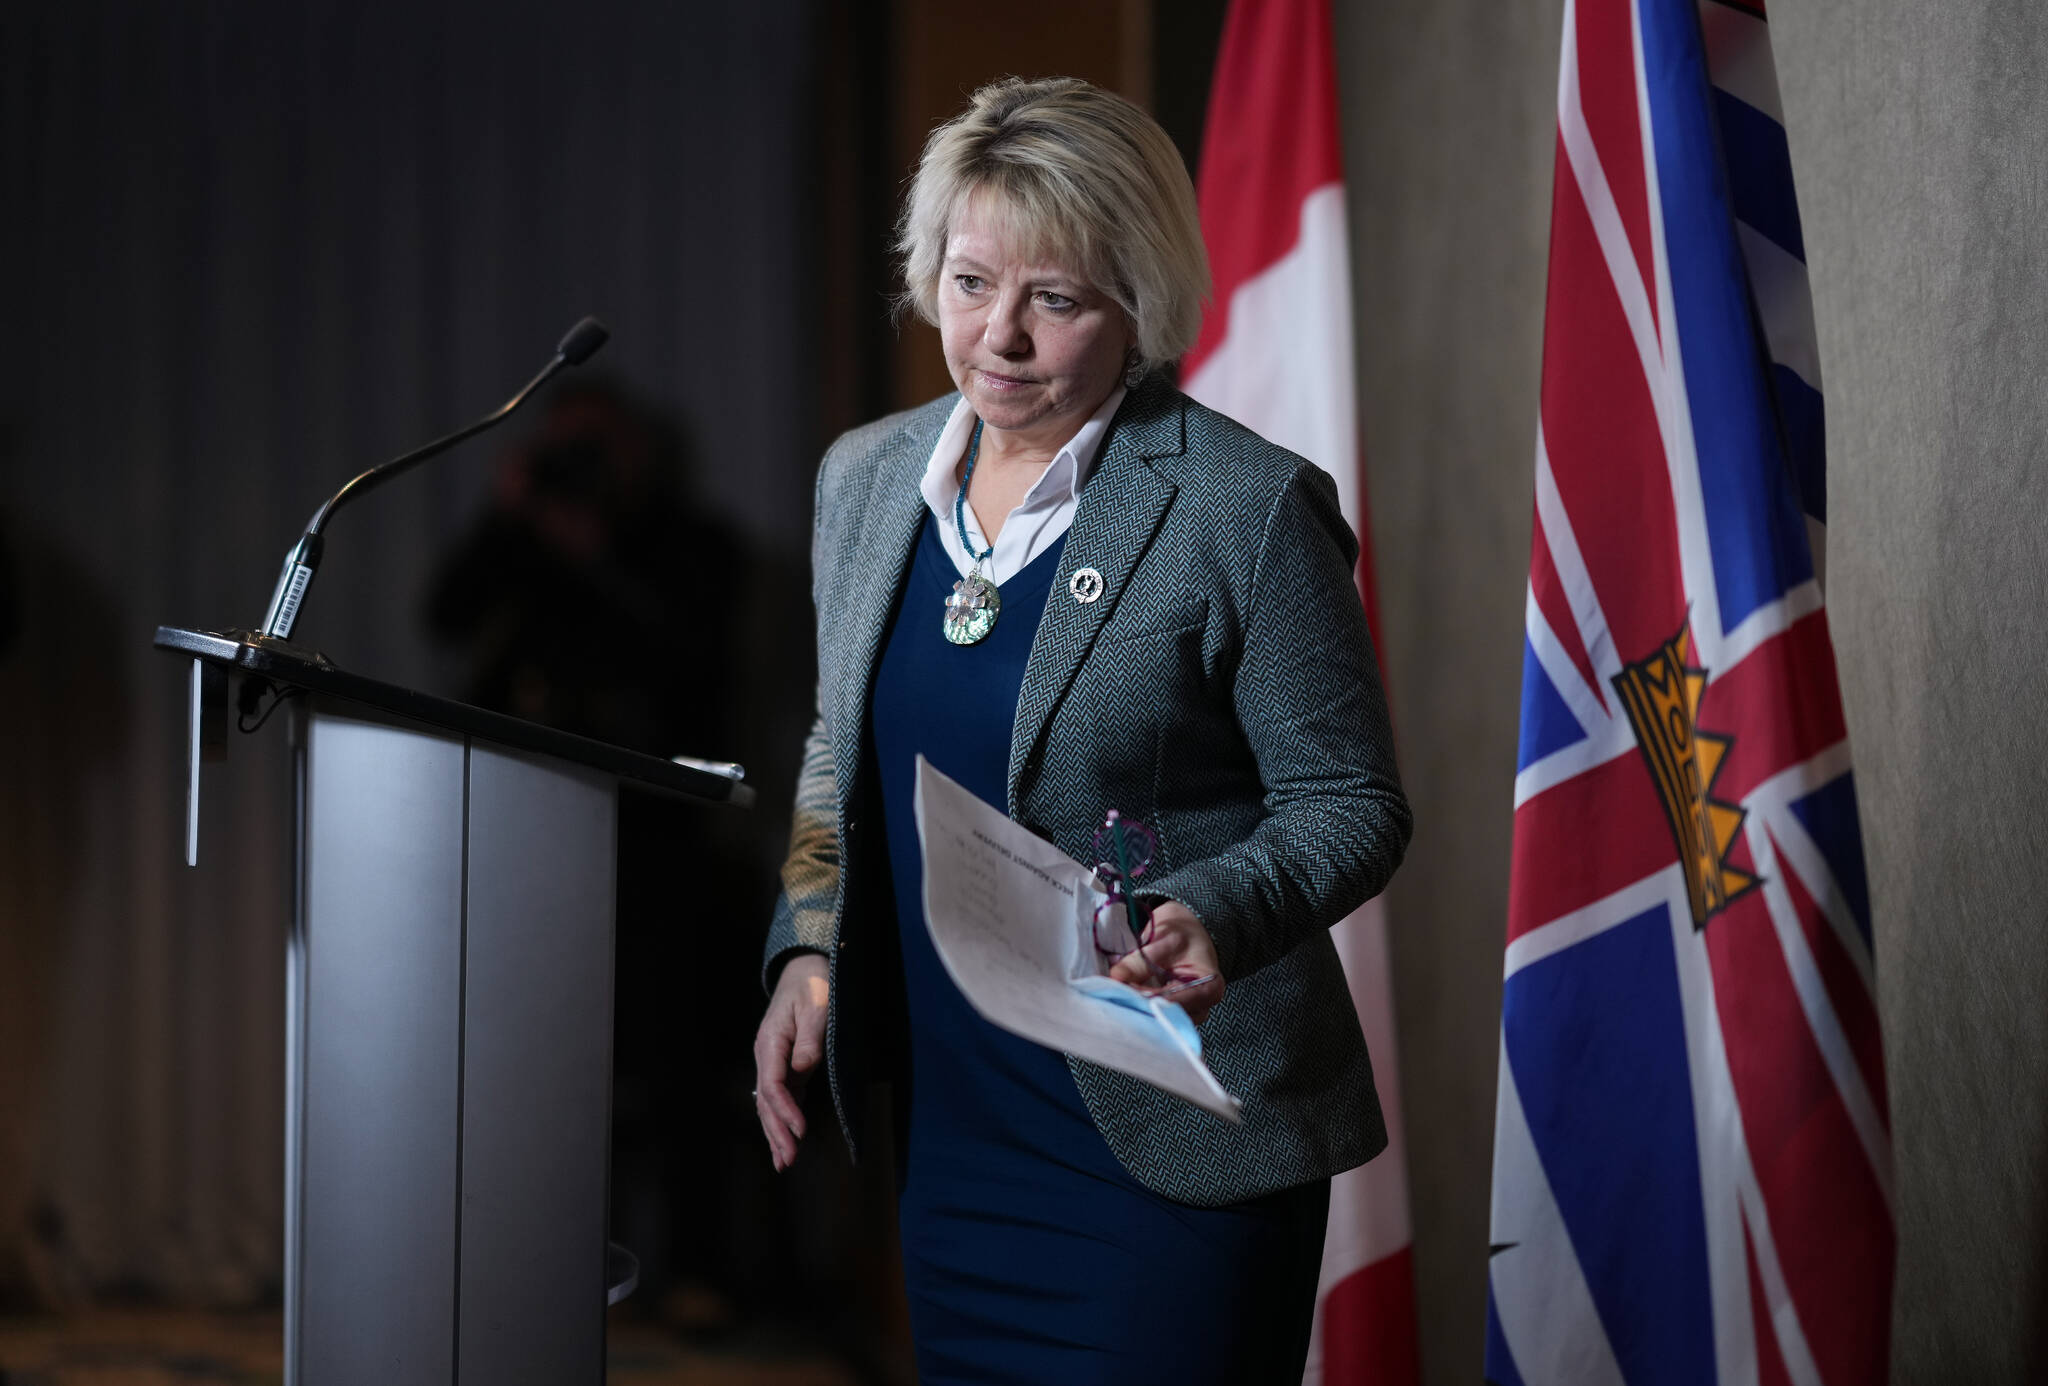 B.C. Provincial Health Officer Dr. Bonnie Henry steps away from the podium after speaking during a news conference in Vancouver, on Monday, January 30, 2023. THE CANADIAN PRESS/Darryl Dyck